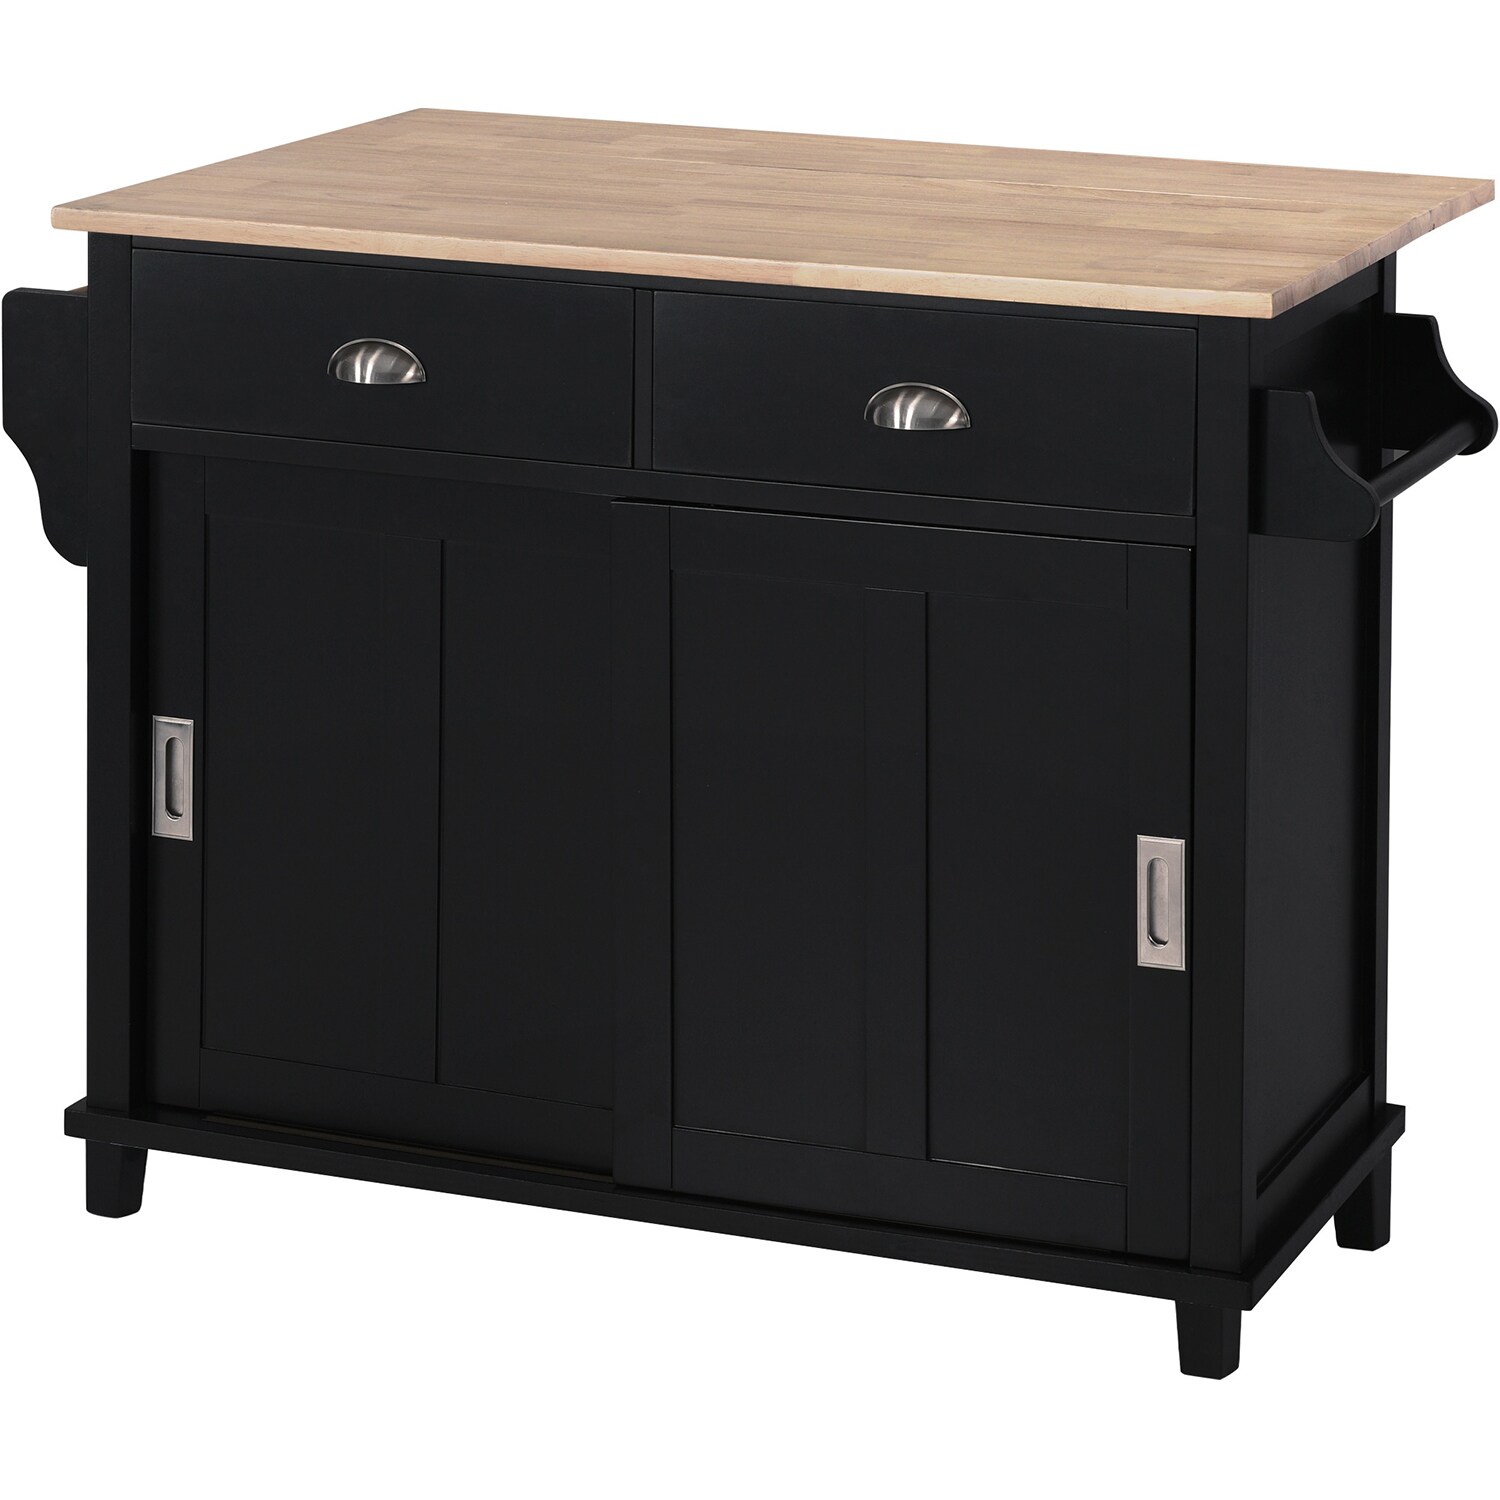 SINOFURN Black Mdf Base with Wood Top Kitchen Cart (30.5-in x 52.2-in x ...